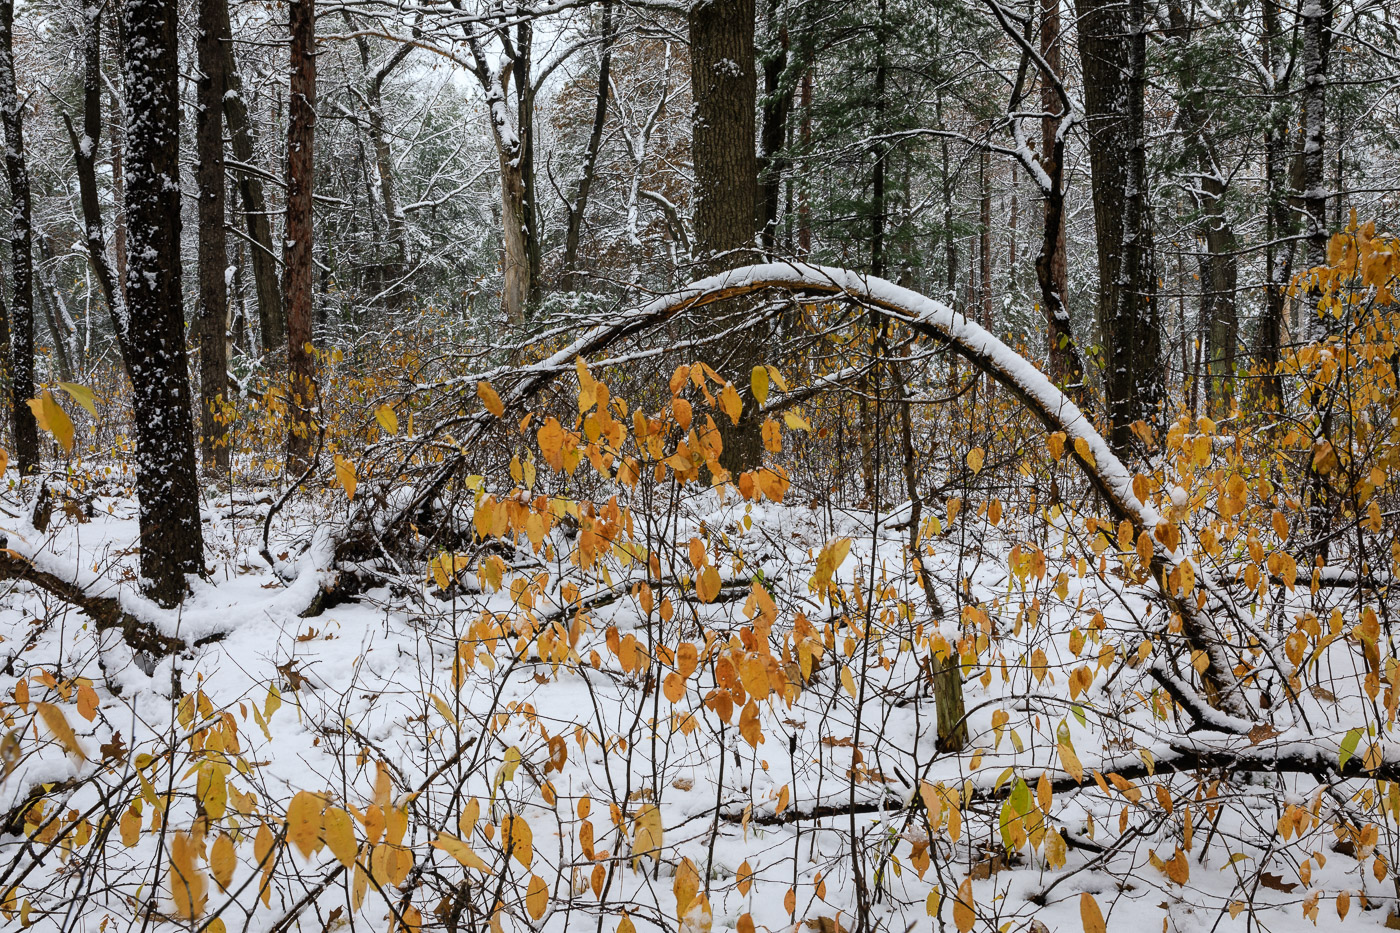 Late Fall and Early Snow in the Forest